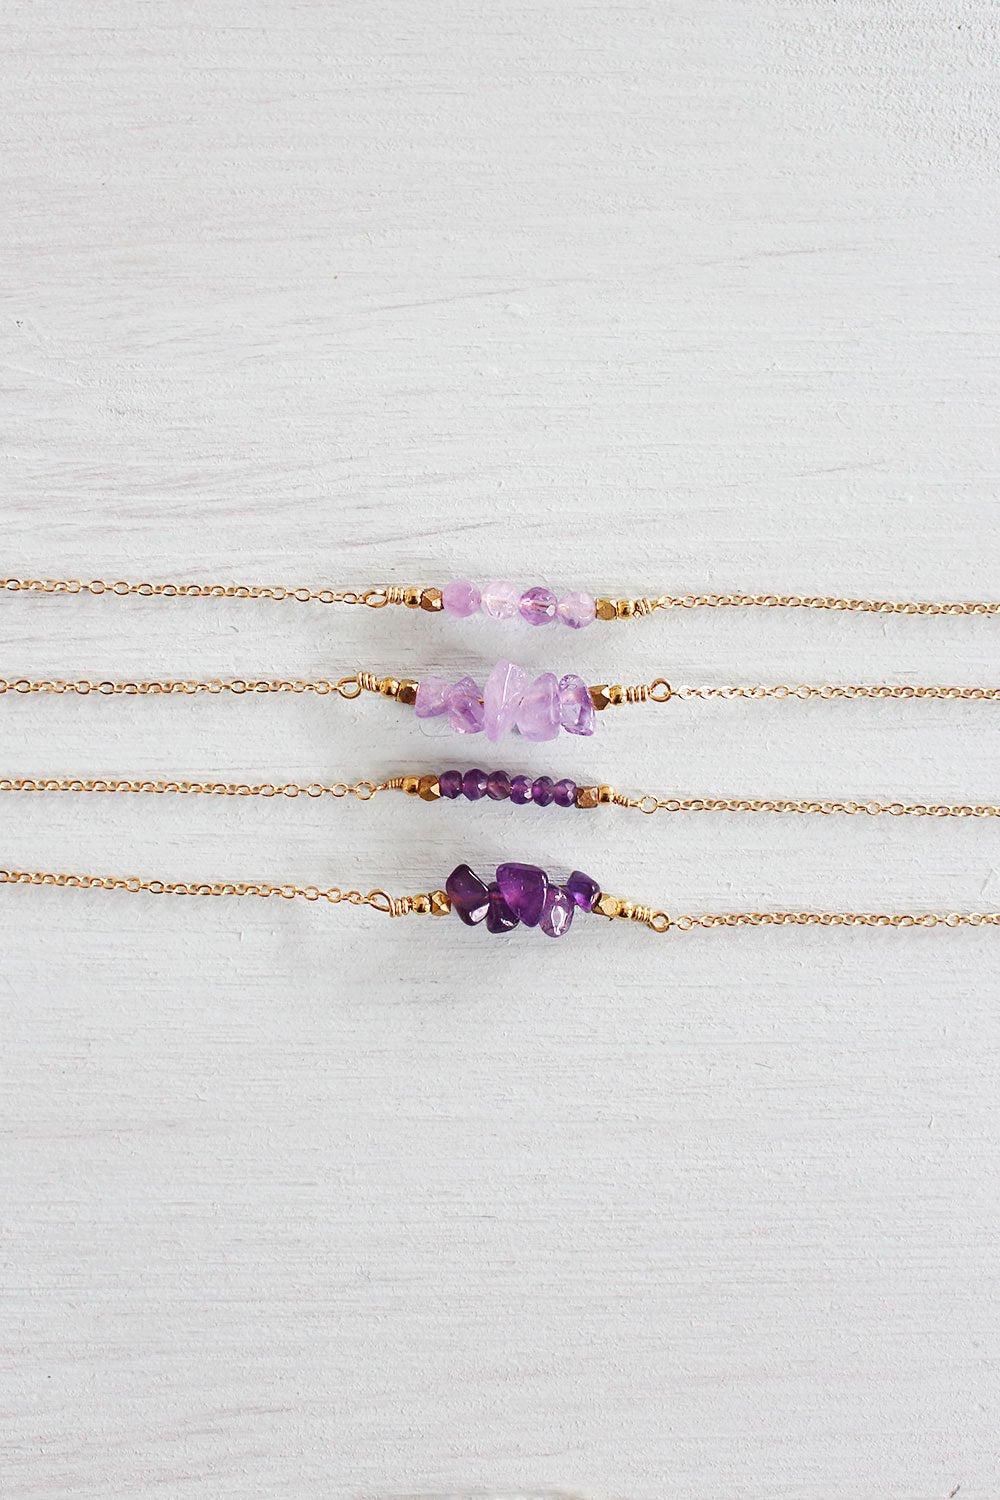 Amethyst bead bar necklaces in different shades of amethyst.